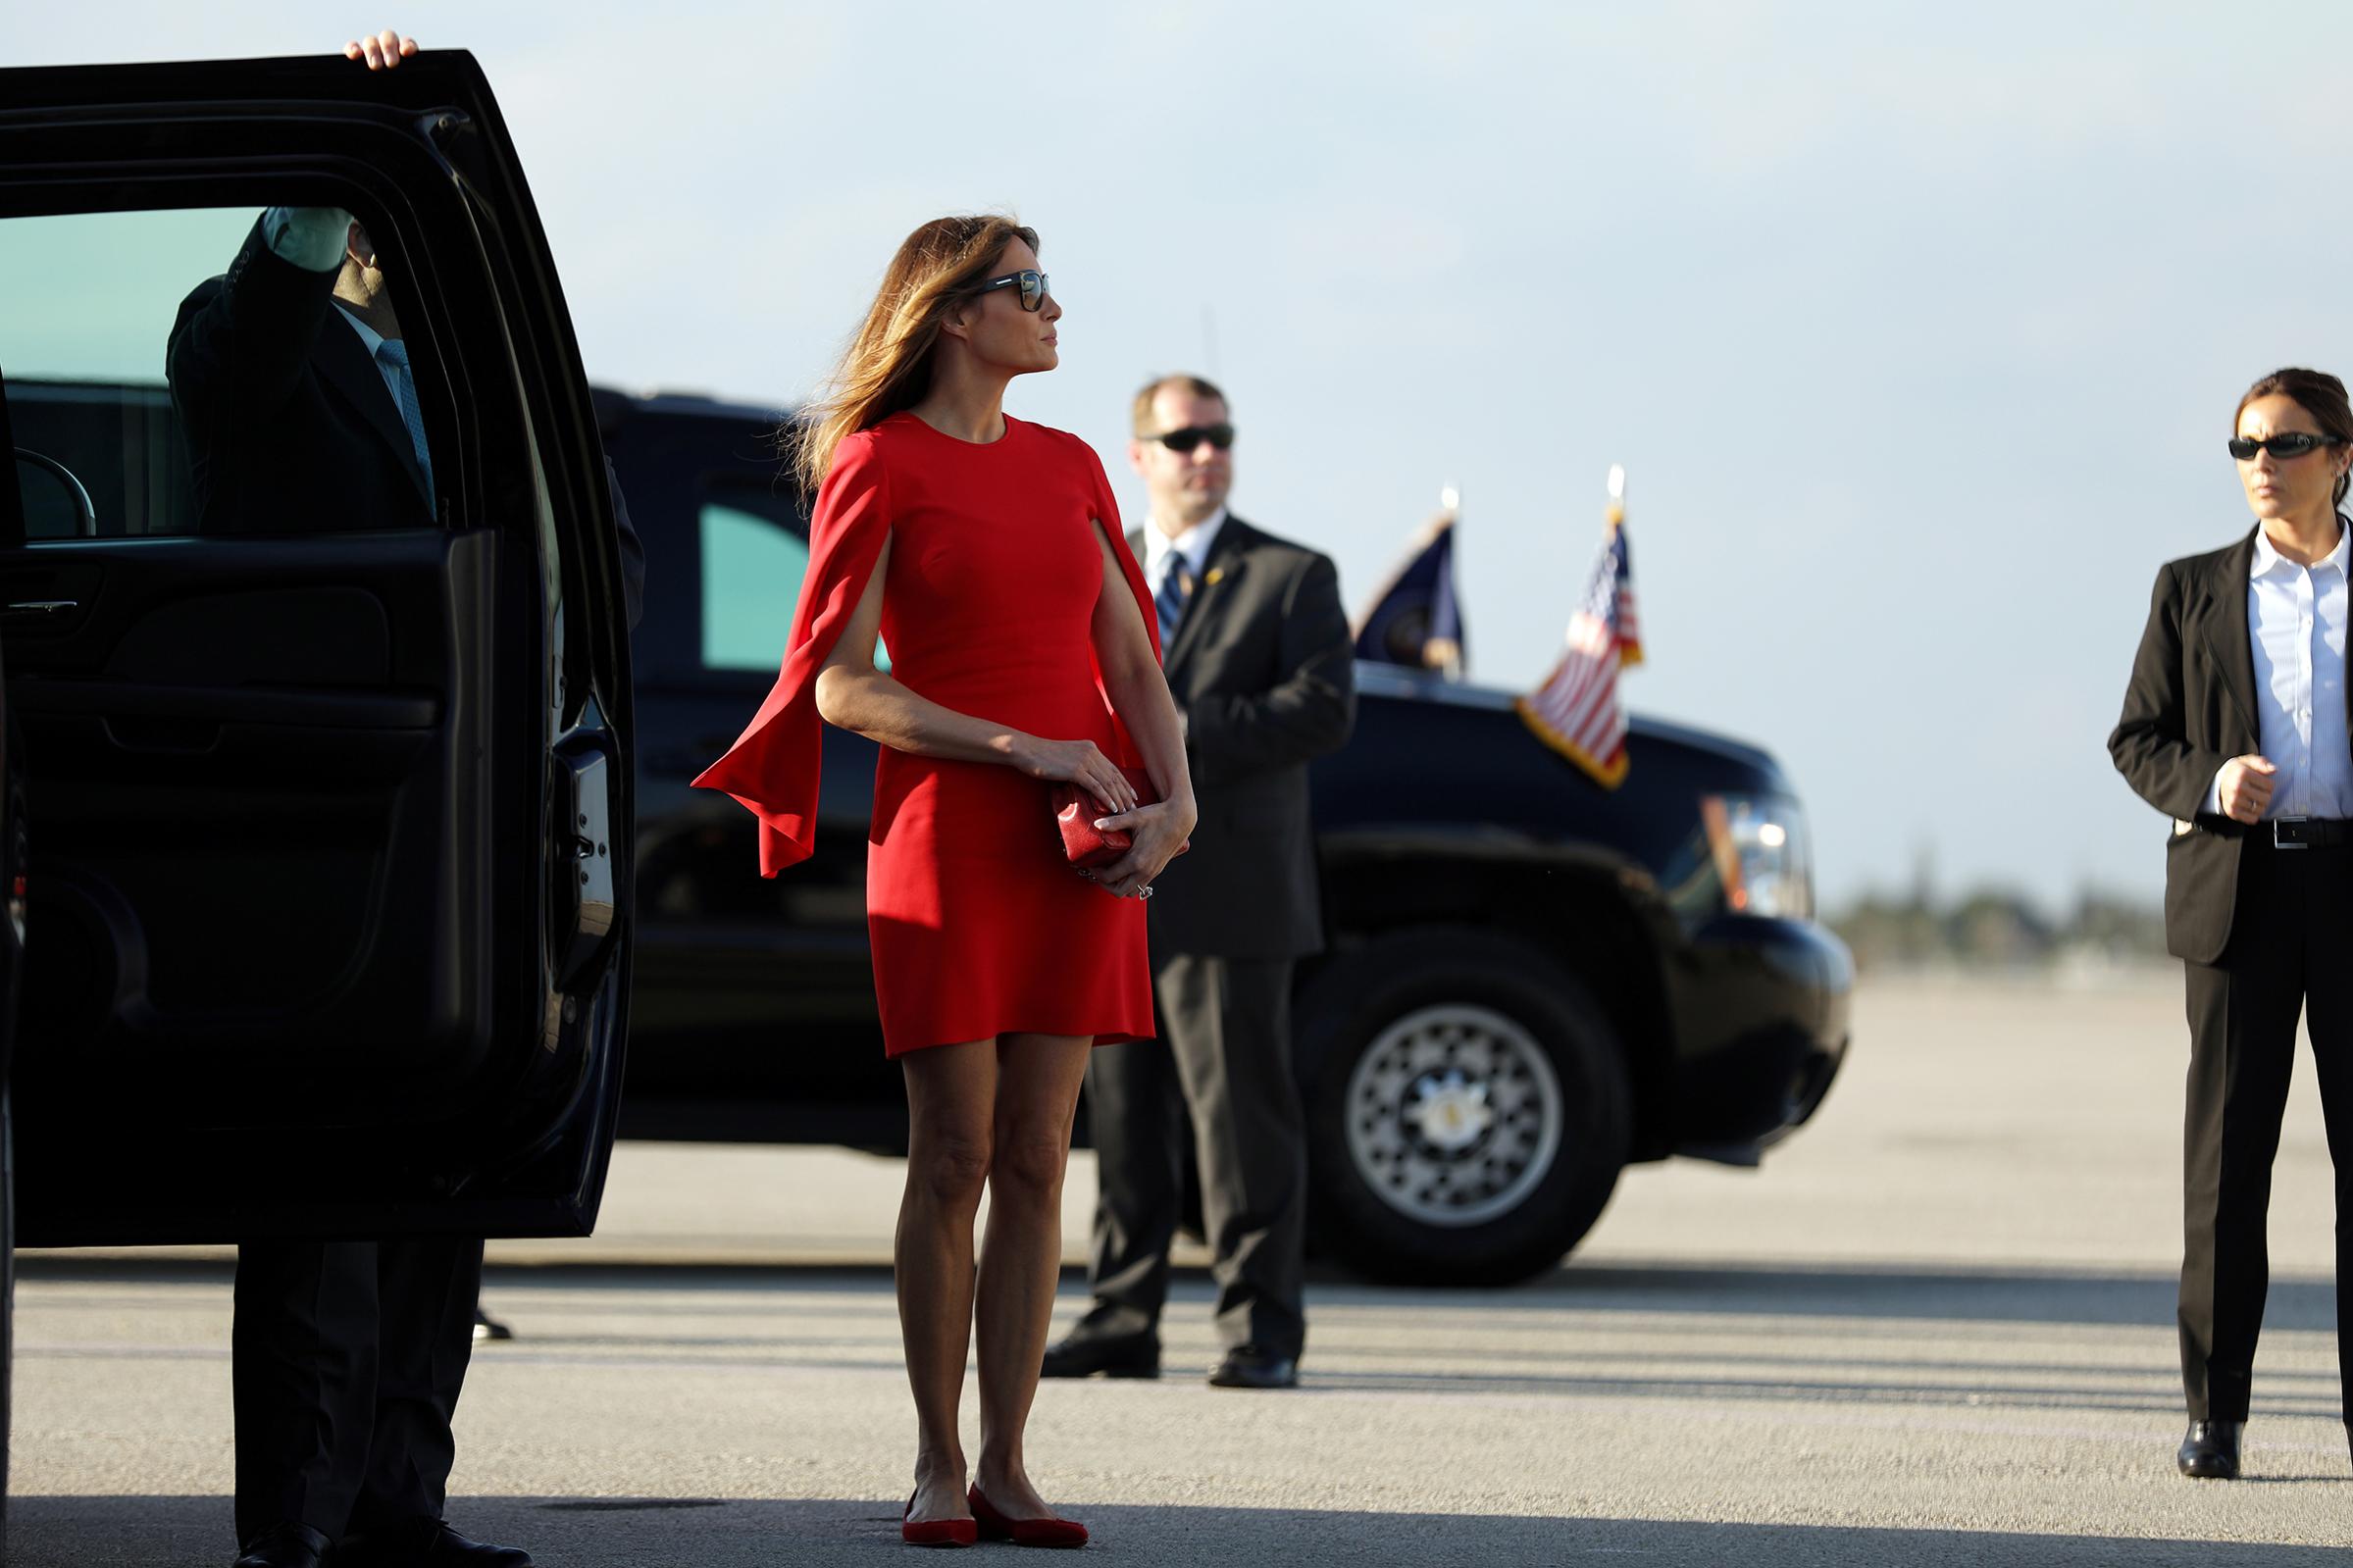 First Lady Melania Trump wearing red split-sleeve dress and red flats arrives to welcome U.S. President Donald Trump (not pictured) at West Palm Beach International airport in West Palm Beach, Florida, U.S., Feb. 3, 2017.